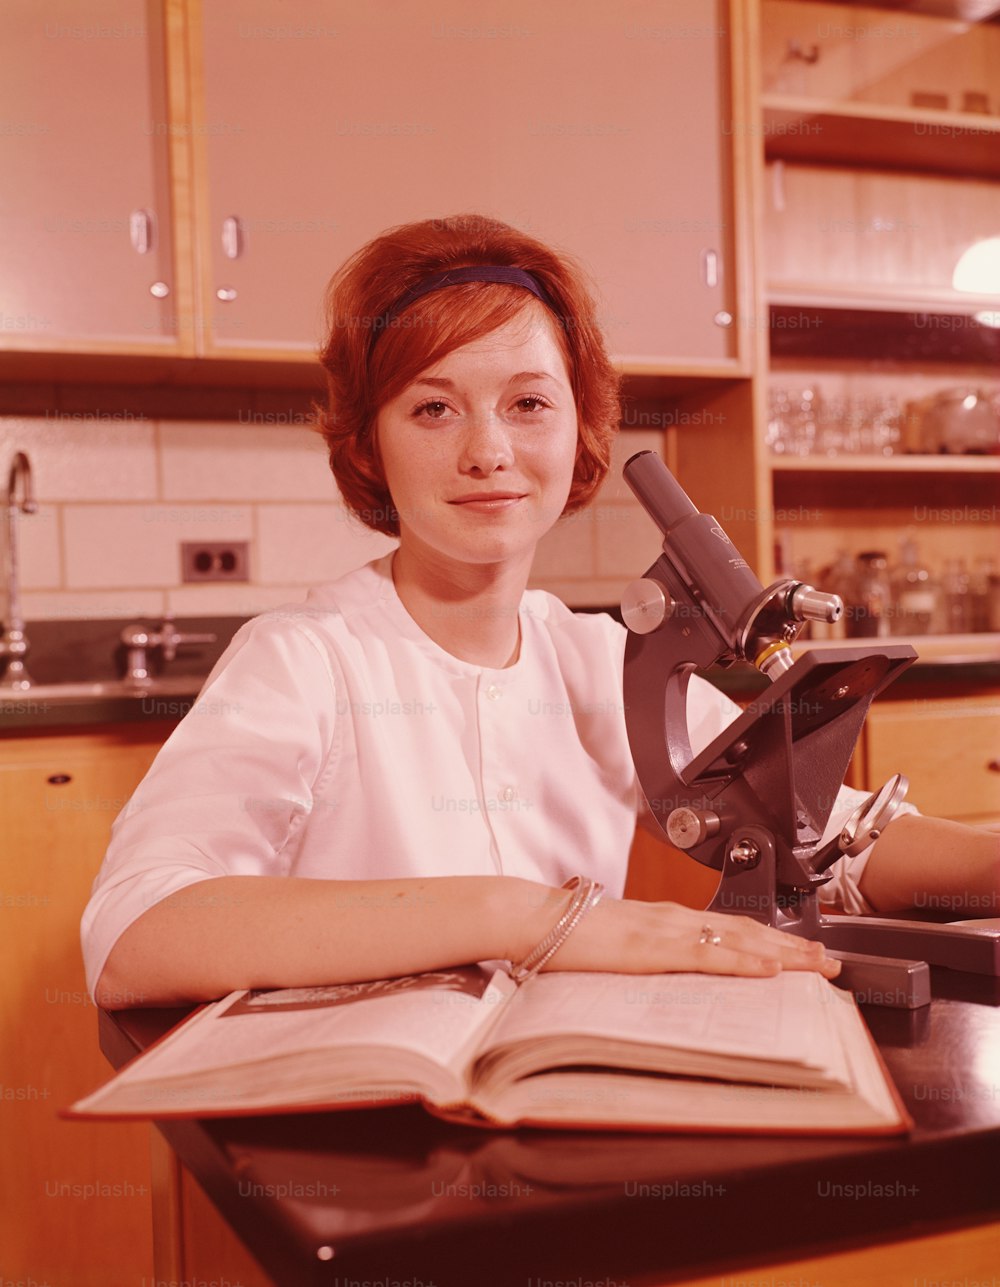 UNITED STATES - CIRCA 1960s:  Teenage female student sitting next to microscope and open textbook, smiling, portrait.